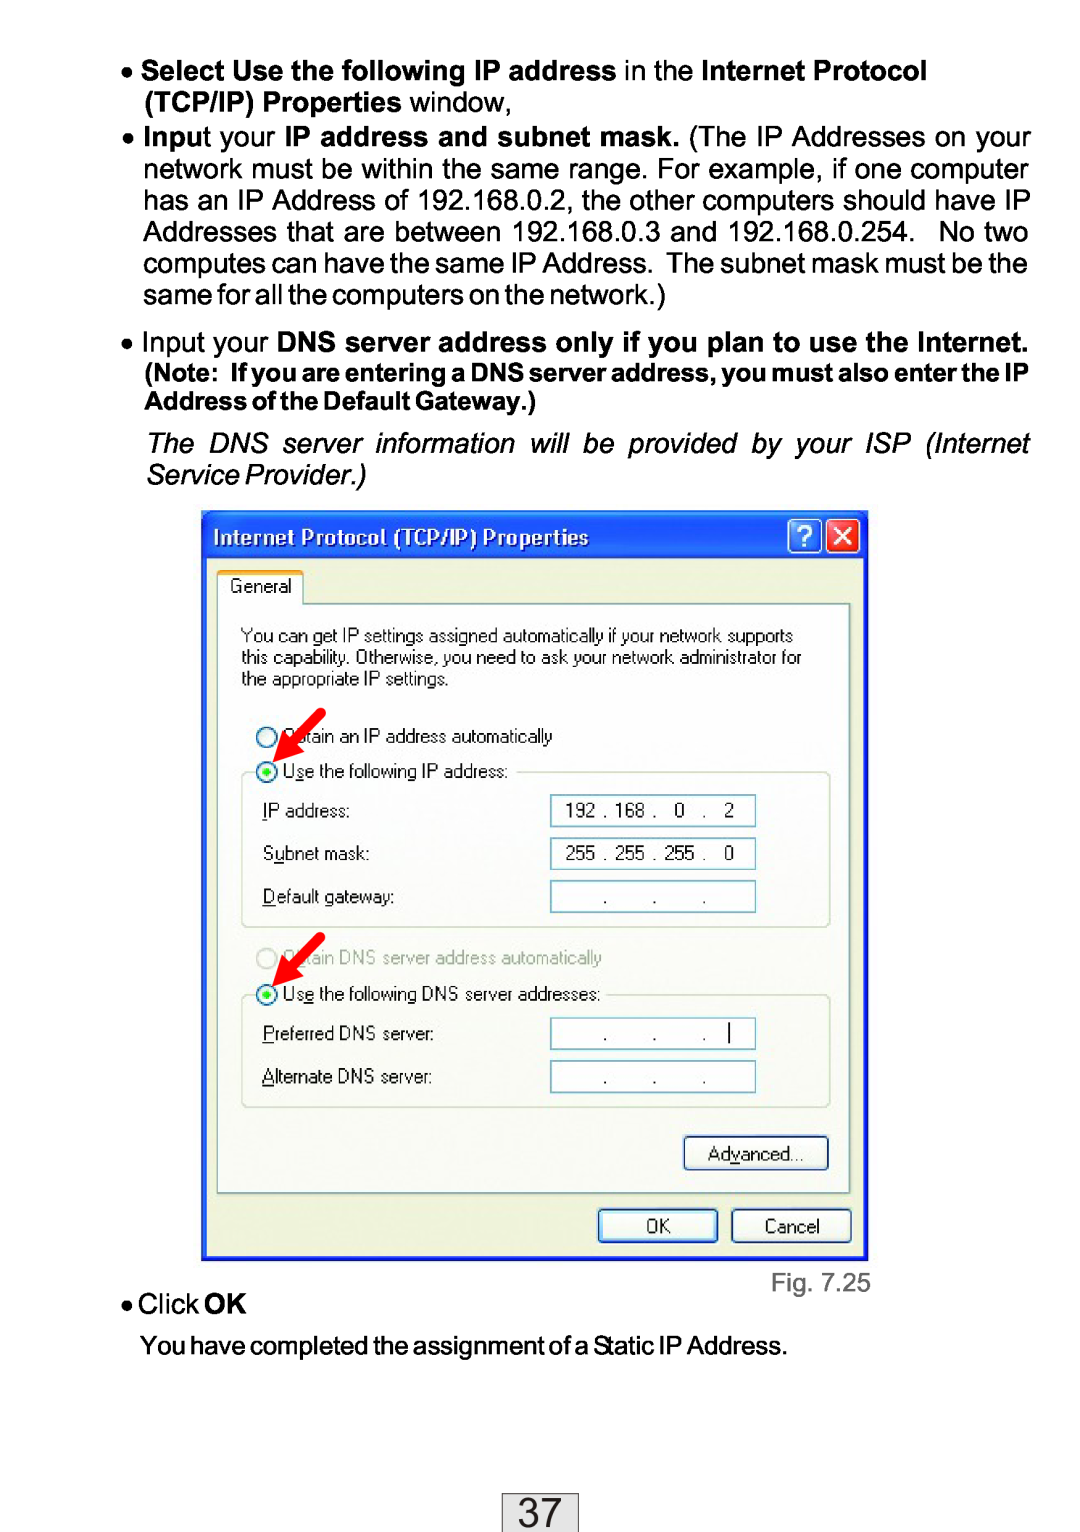 TRENDnet TEW-310APBX manual ∙ Input your DNS server address only if you plan to use the Internet 